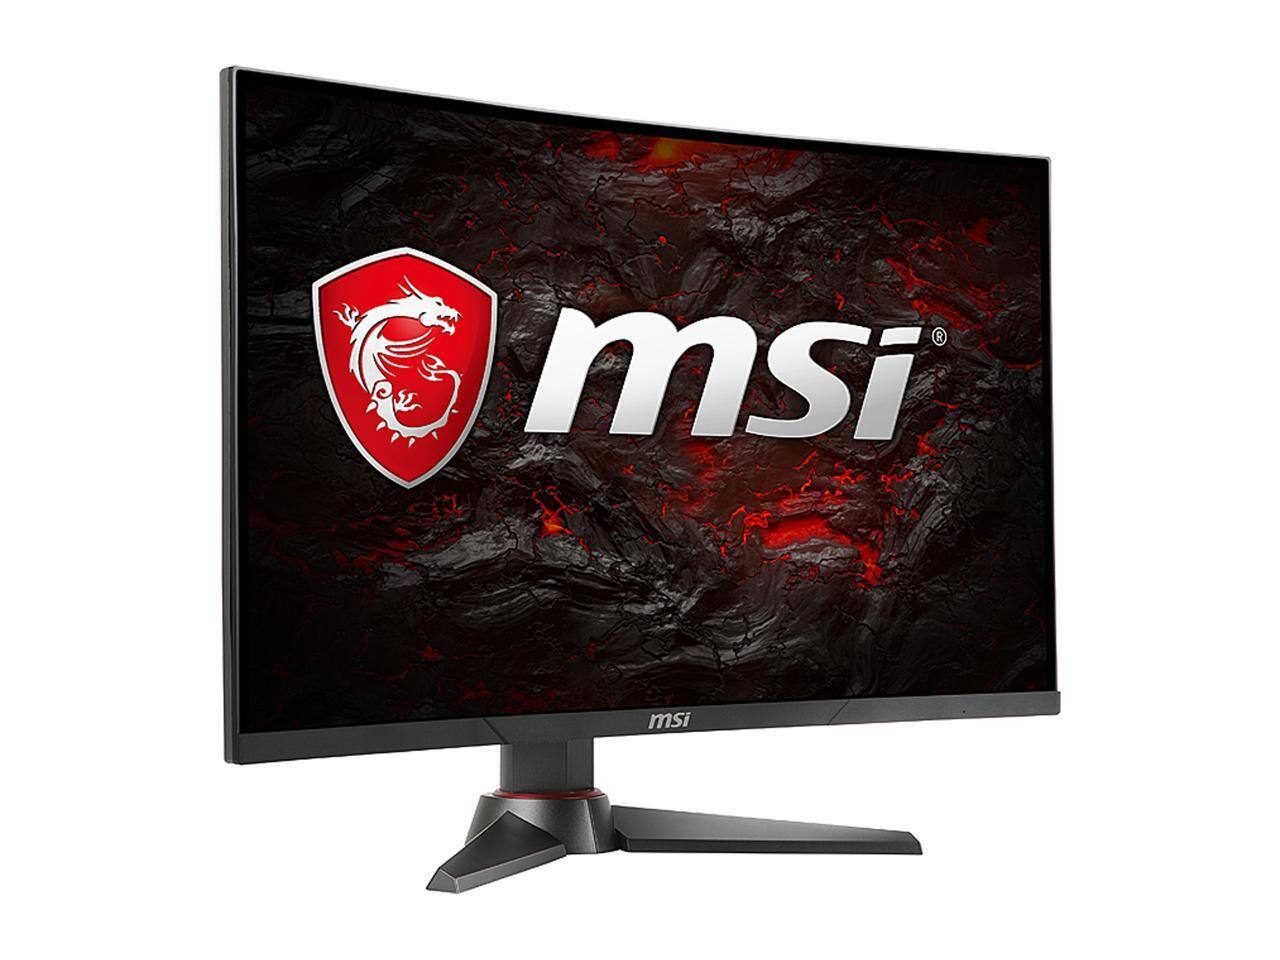 MSI Optix MAG272CQR 27" [2560 x 1440 2K Resolution, 1ms, 165Hz, AMD FreeSync] Curved Gaming Monitor $332.99. AC & More